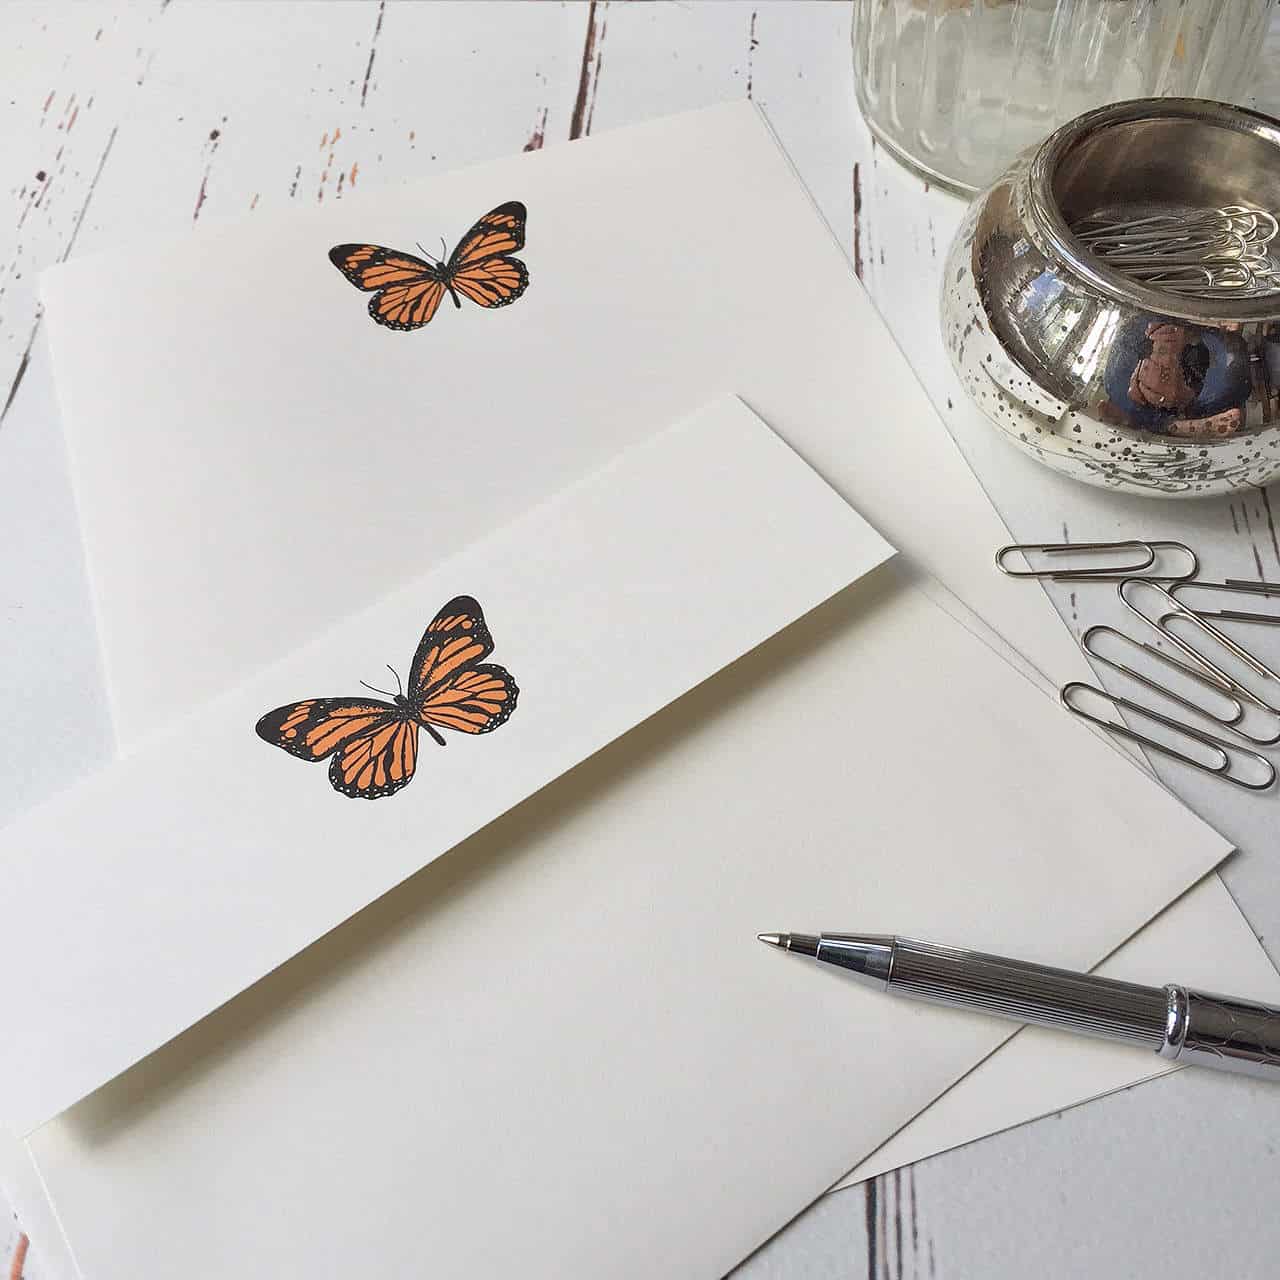 Writing paper with an Orange Butterfly illustration